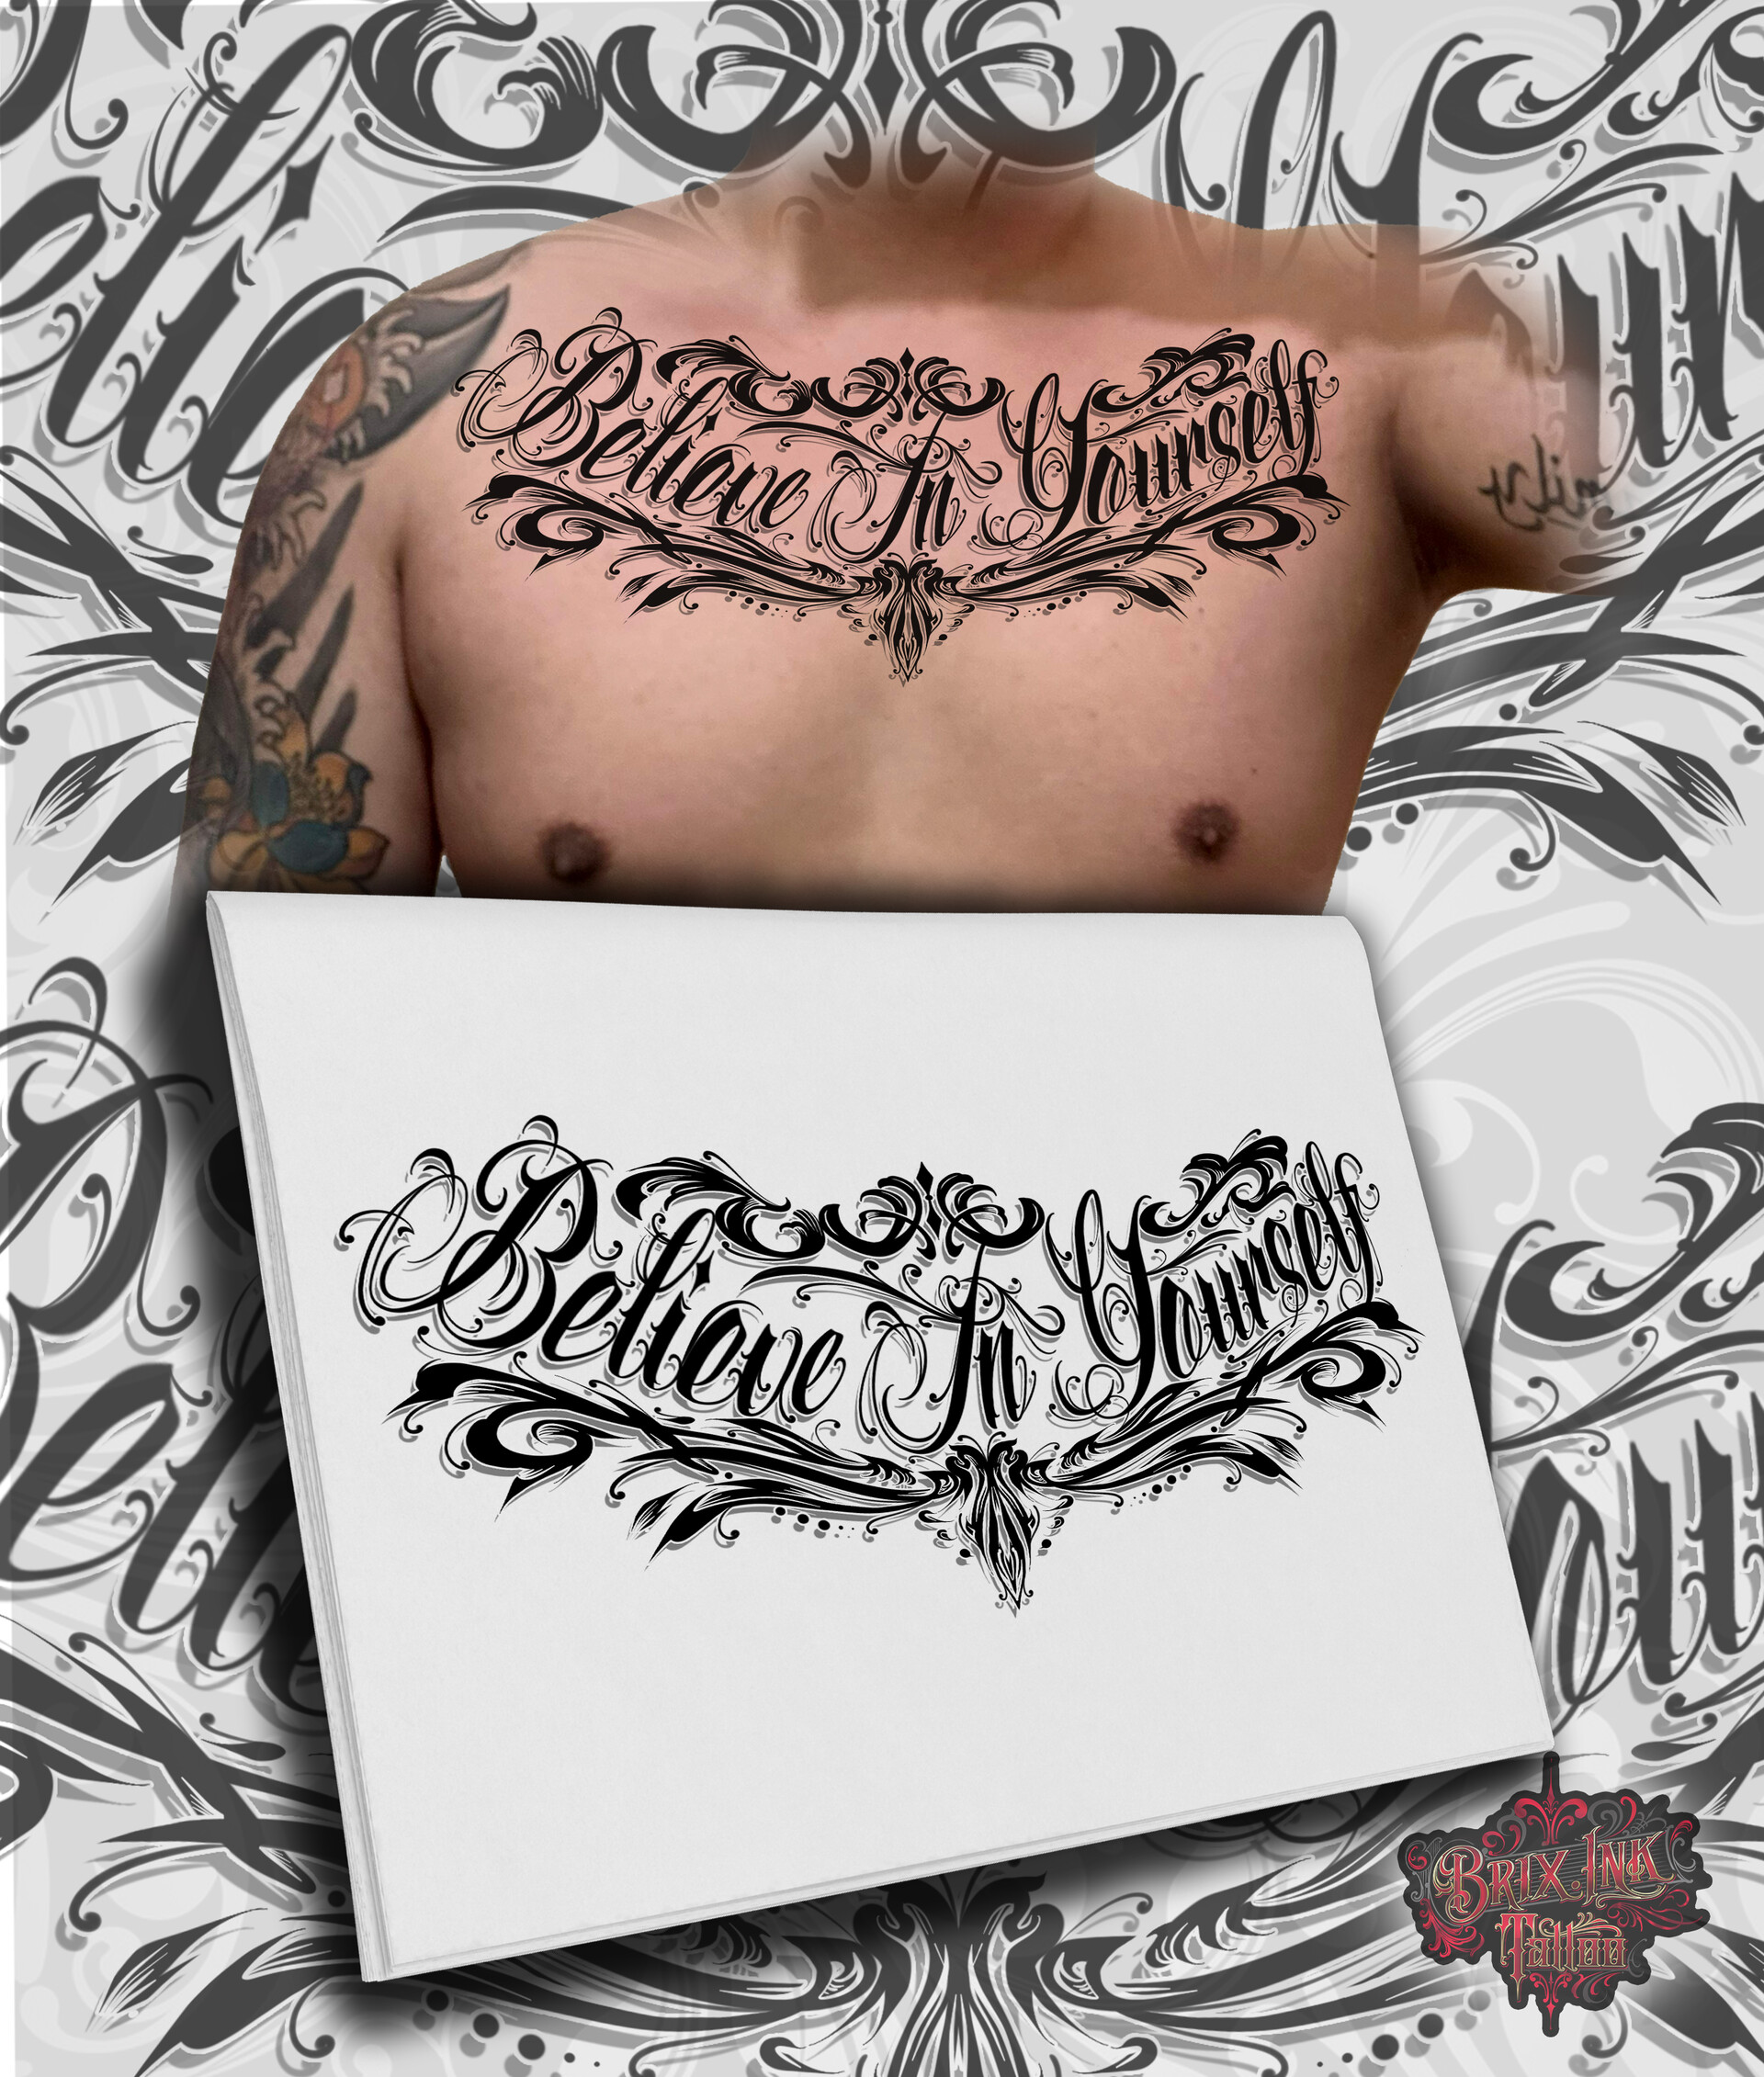 125 Chest Tattoos For Men  Things To Know Before Getting